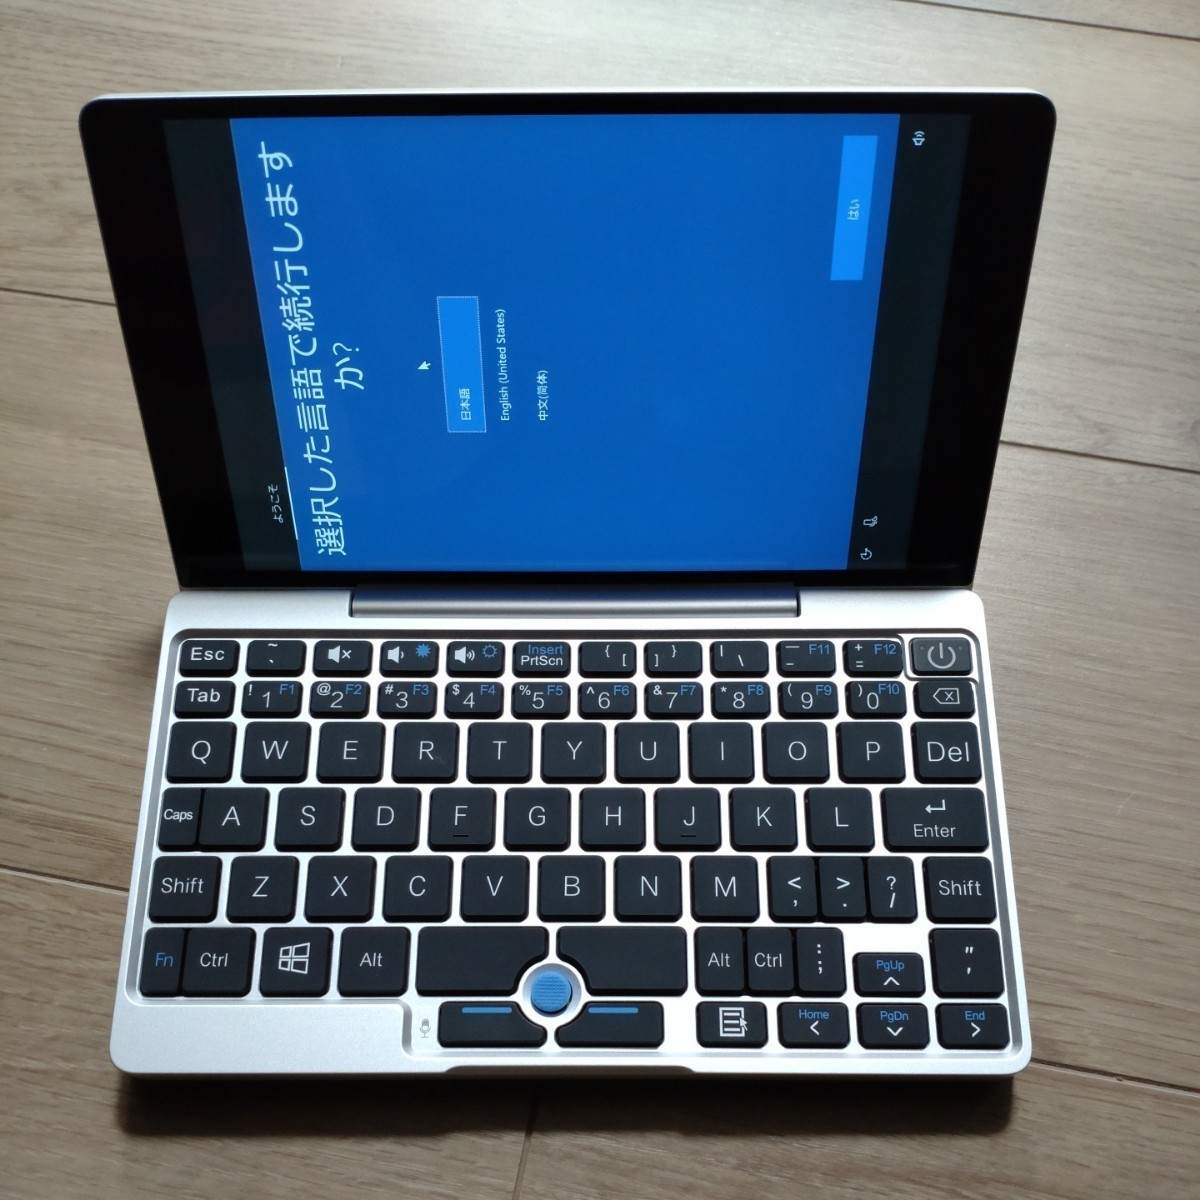 GPD Pocket 初代商品细节| Yahoo! JAPAN Auction | One Map by FROM JAPAN